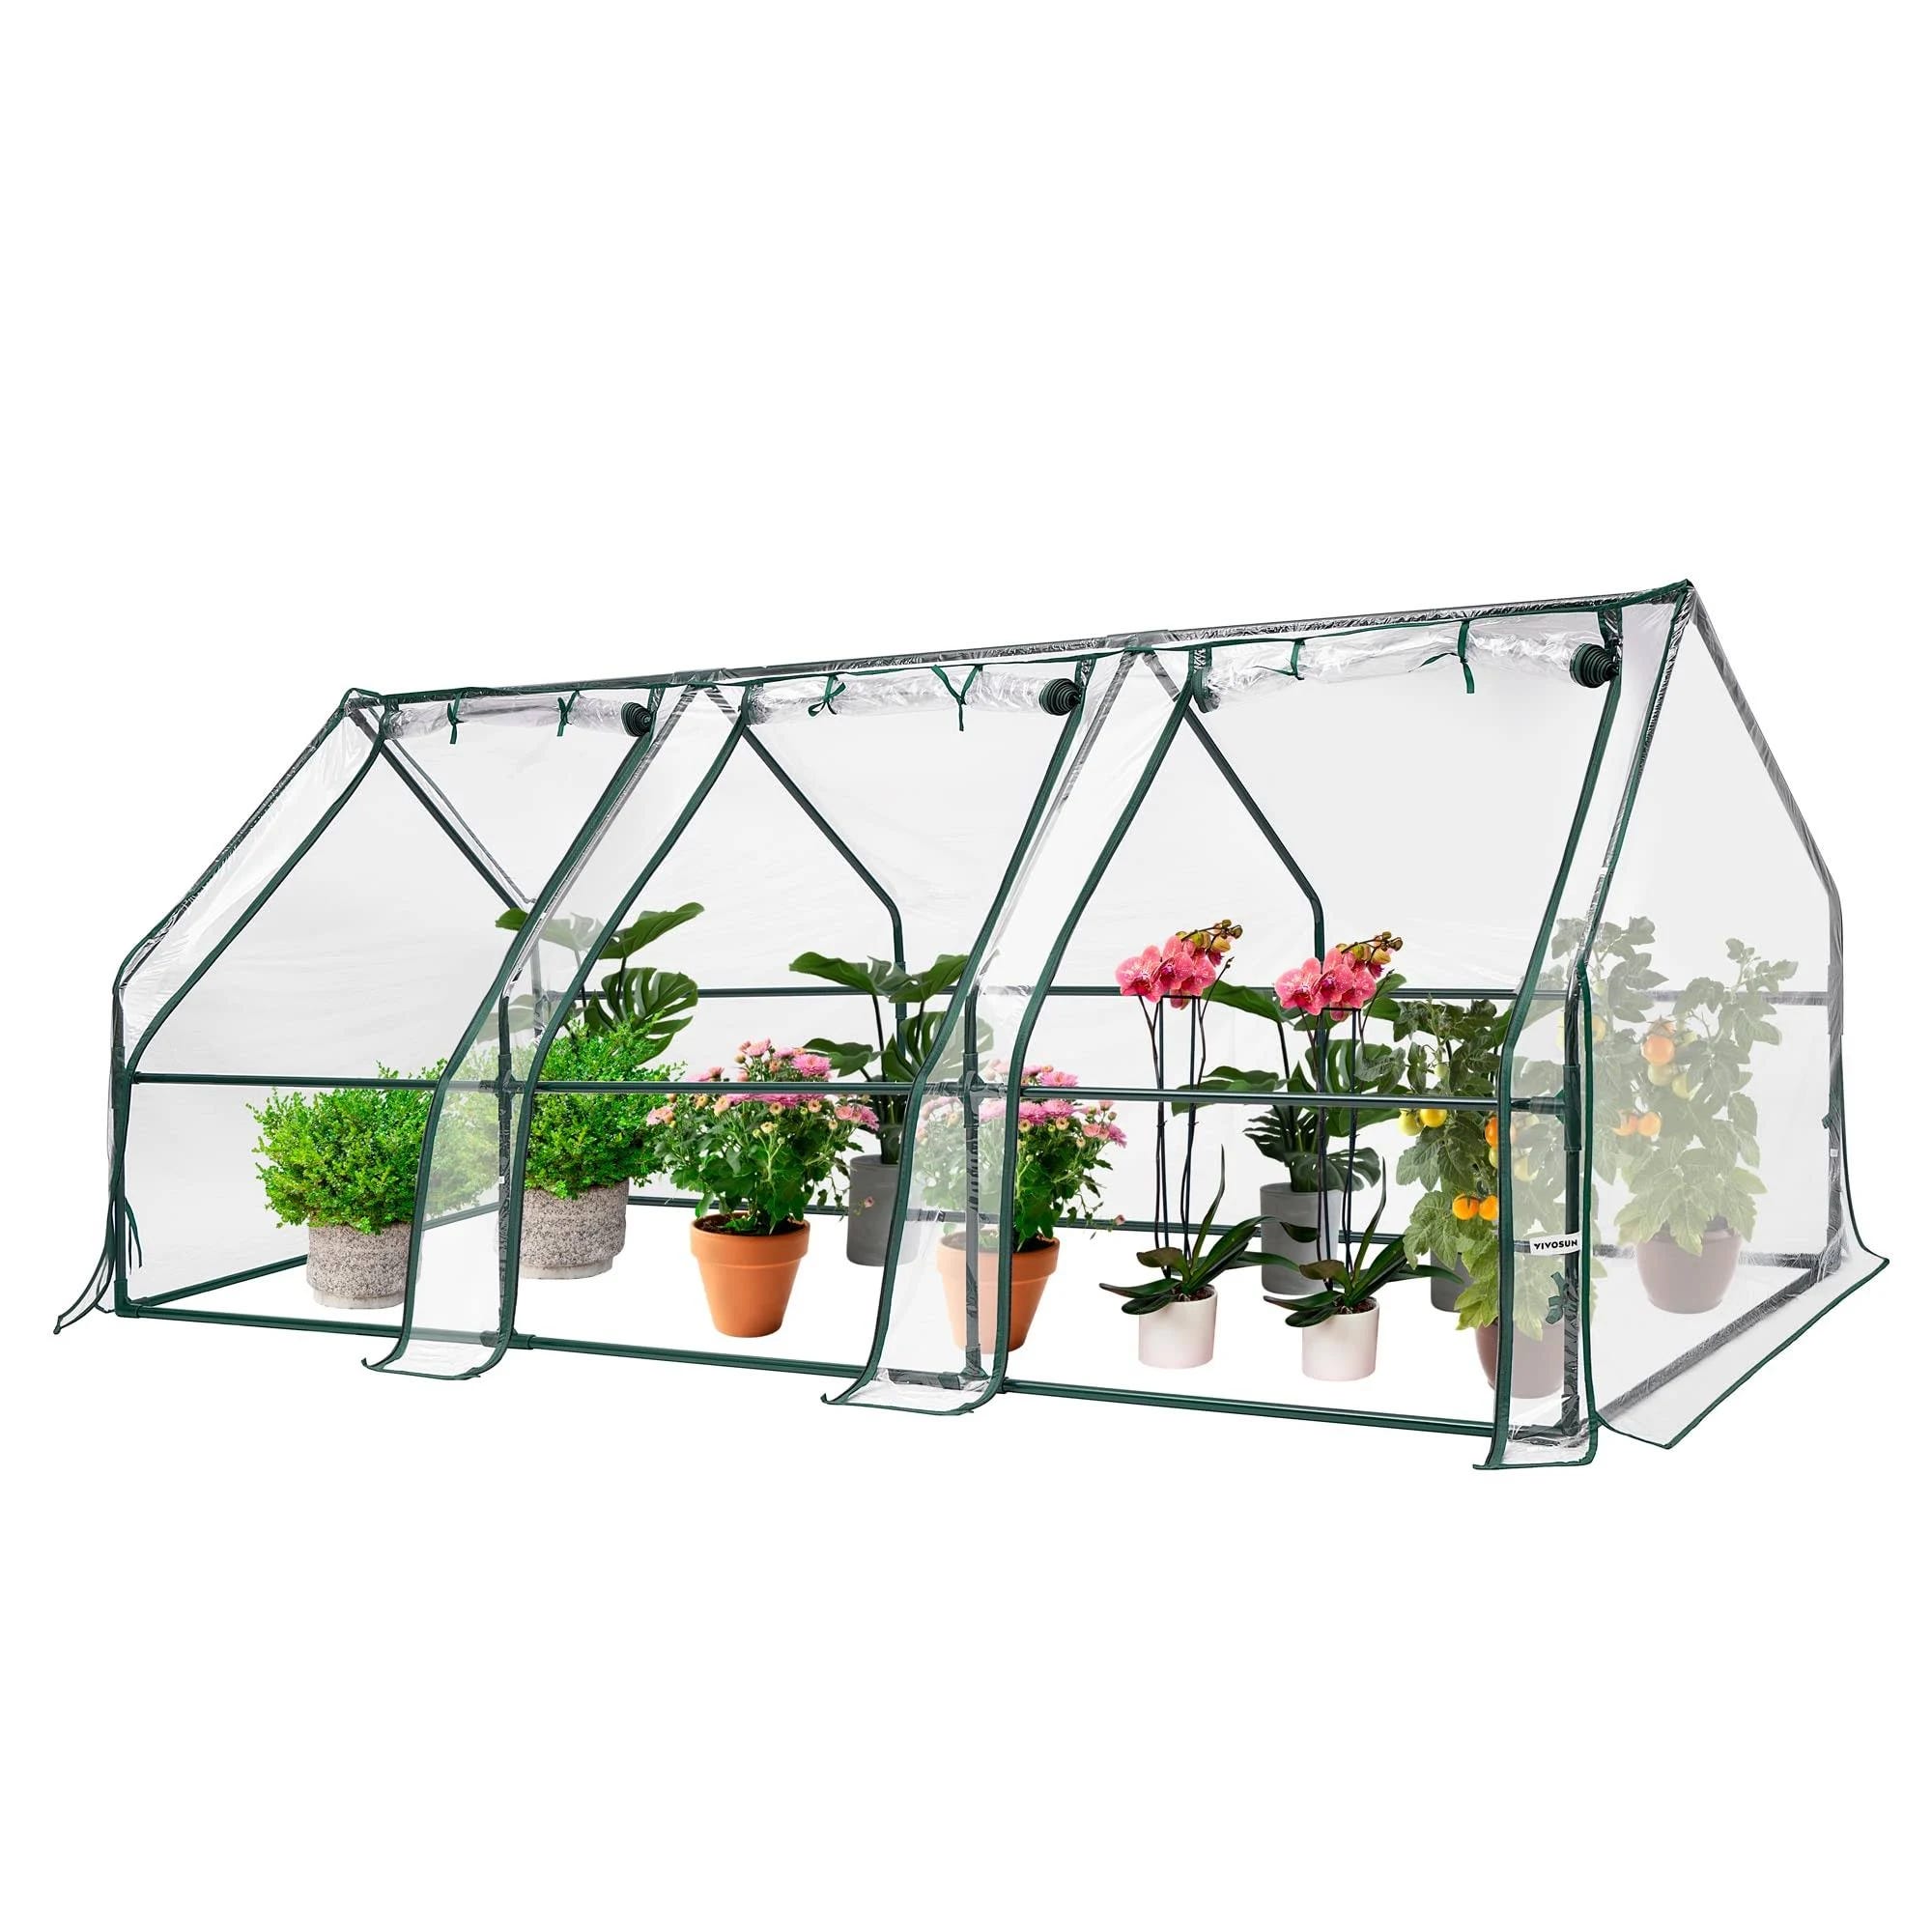 Indoor/Outdoor VIVOSUN Portable Mini Greenhouse for Year-Round Planting | Image